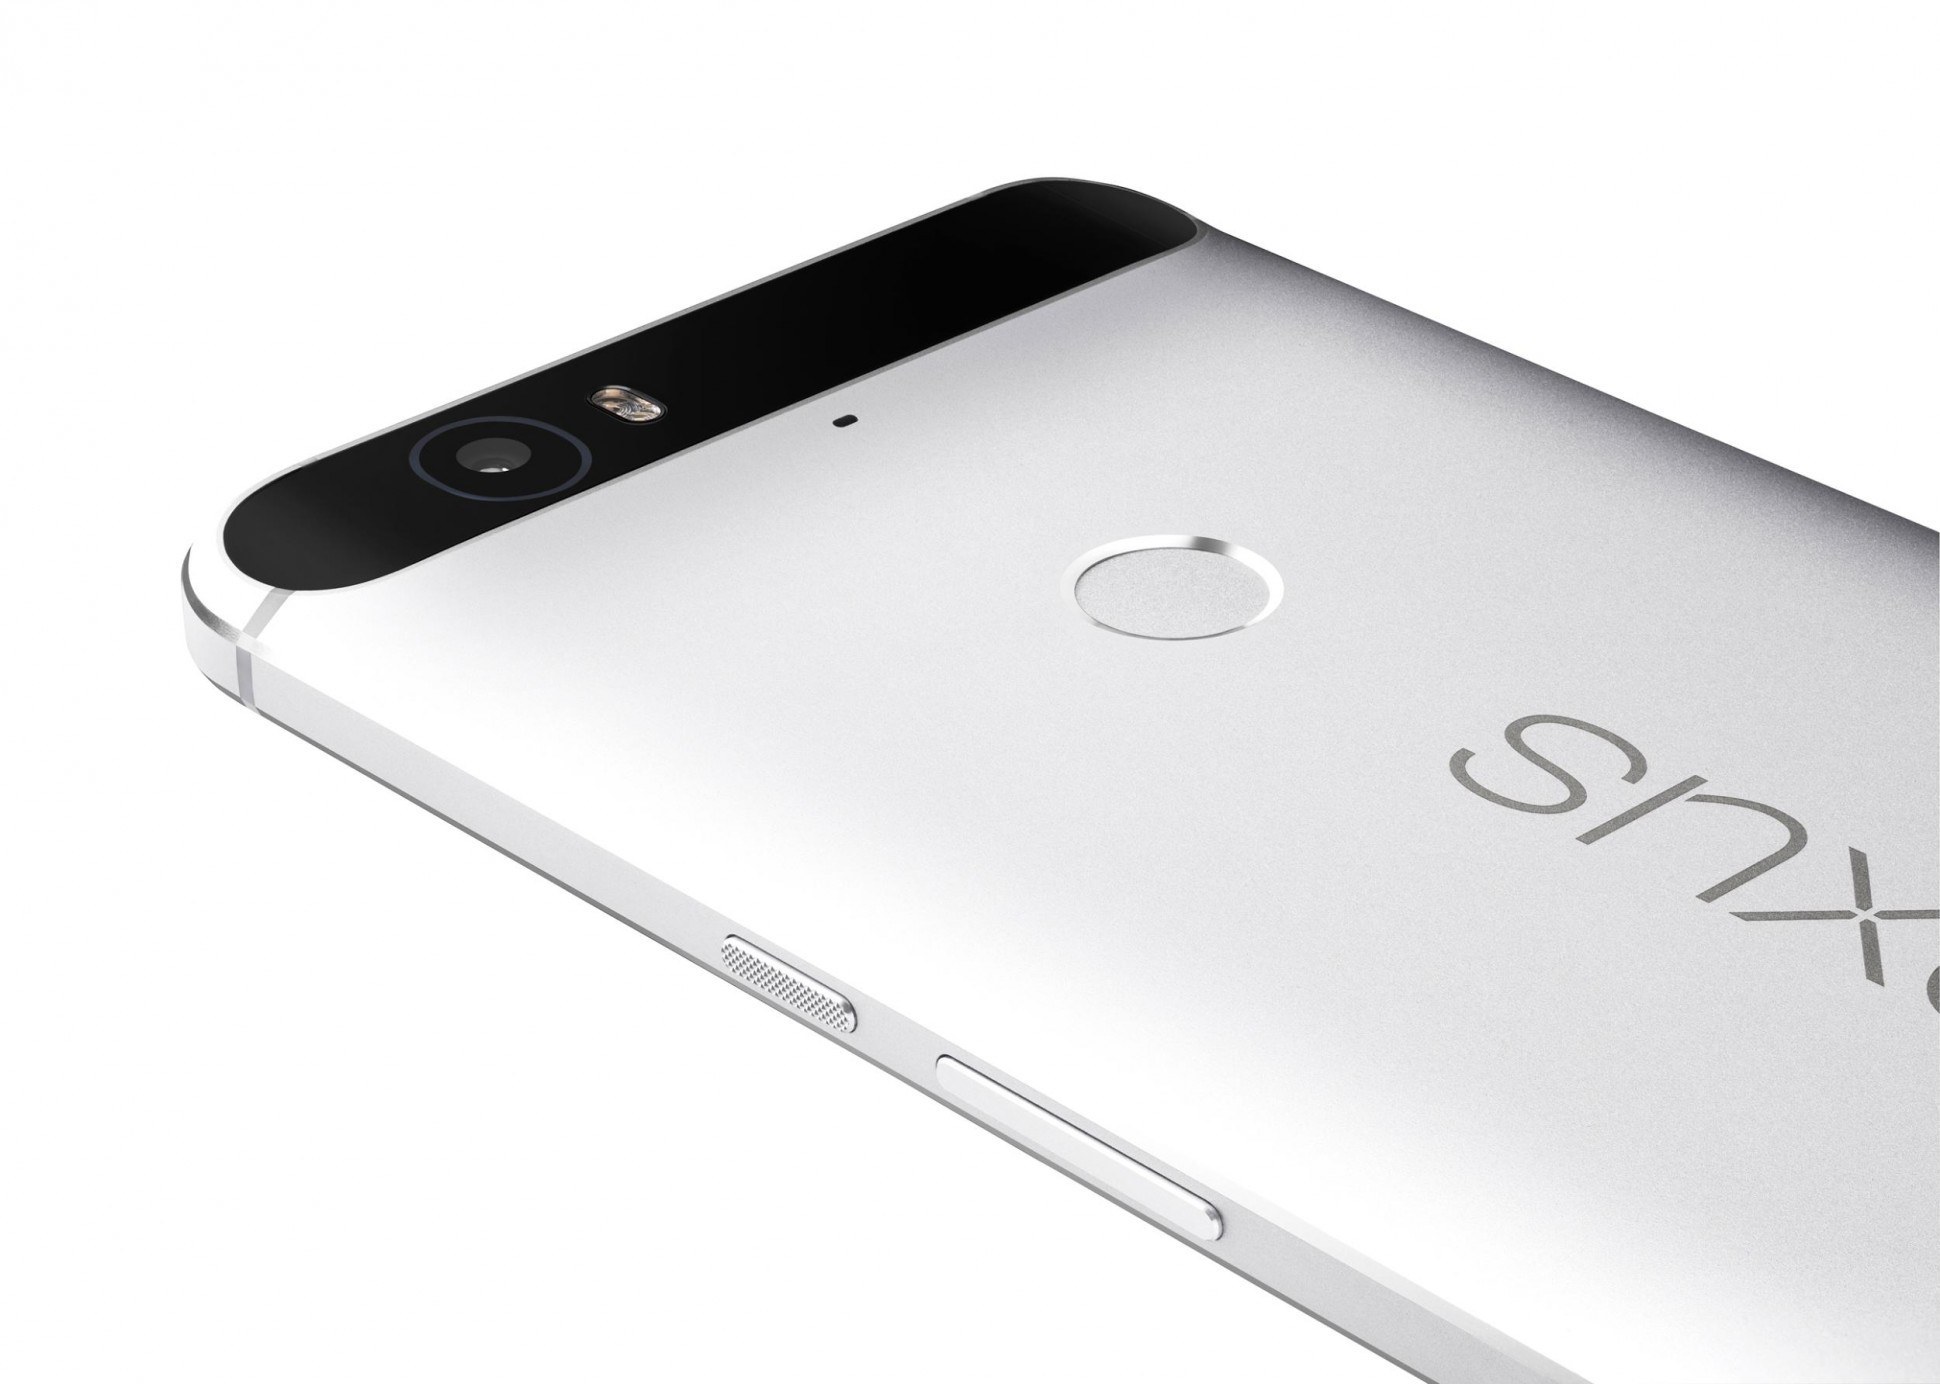 Nexus 6P: How To Disable And Turn OFF Clicking Sounds